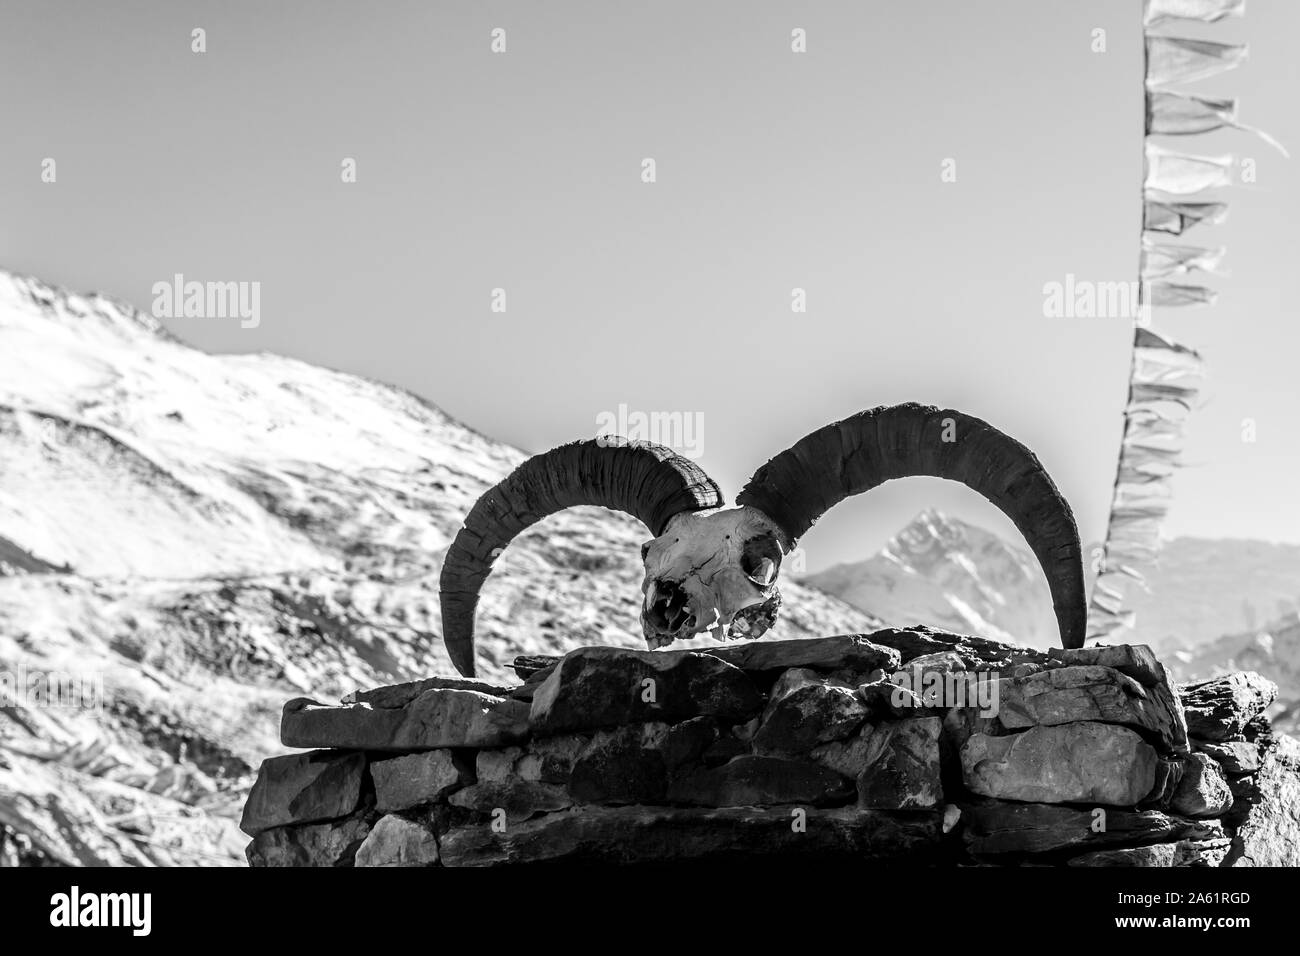 Skull of an animal and prayer buddhist flags fluttering in the wind, Nepal, Himalaya. Black and white mountain background. Stock Photo